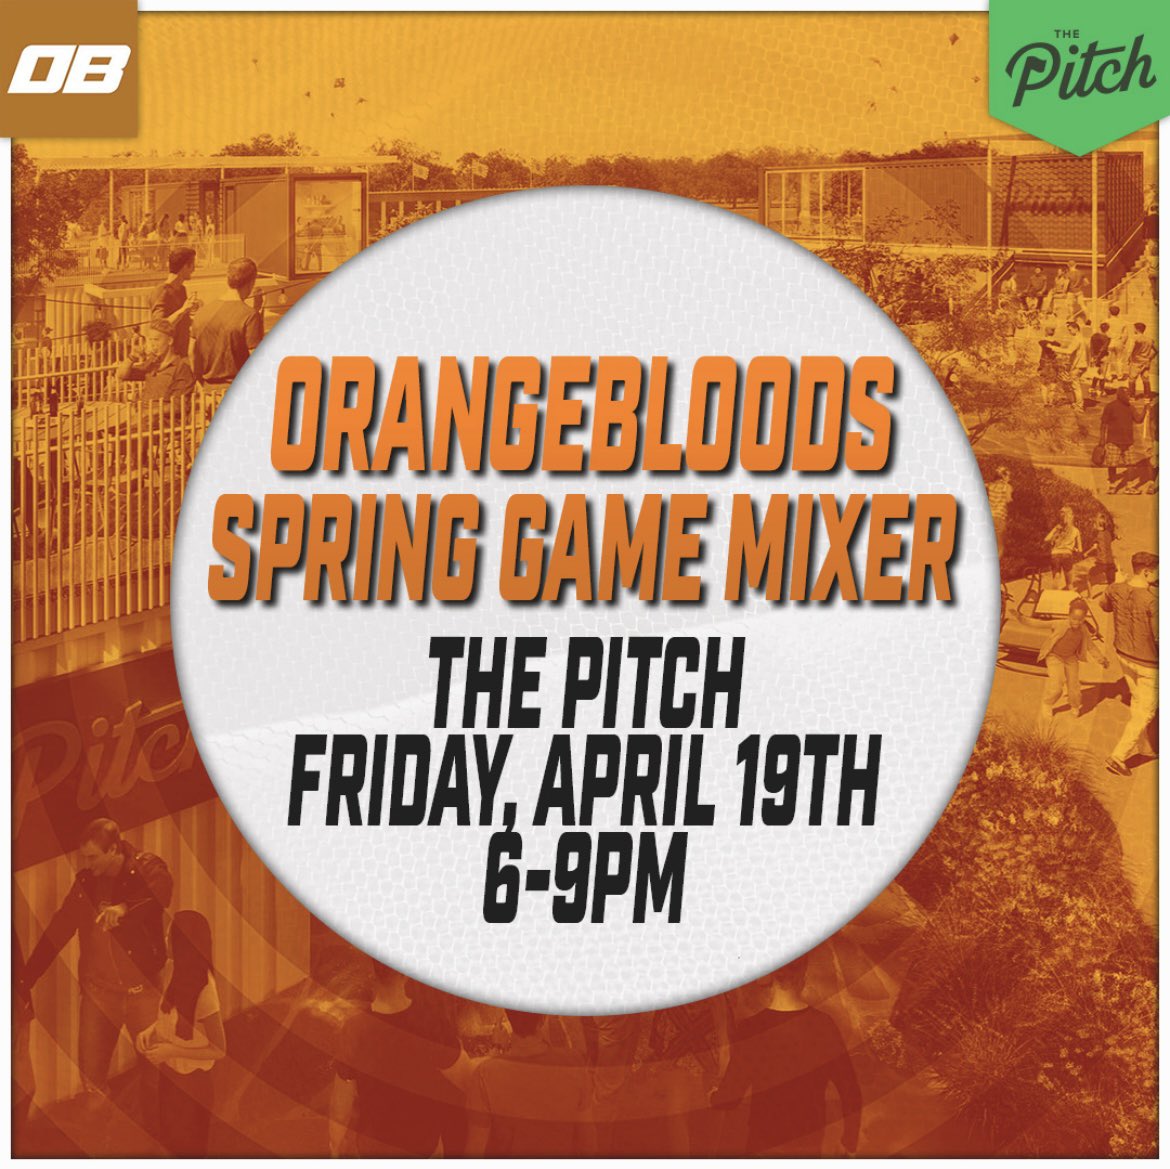 Longhorns Fans 🗣️ Join us at The Pitch Next Friday for Our Orangebloods Spring Game Mixer! 🤘 Talk Ball, Play Games, and Enjoy Great Food and Drinks at the Best Spot in Austin 🙌 We’ll See You There!